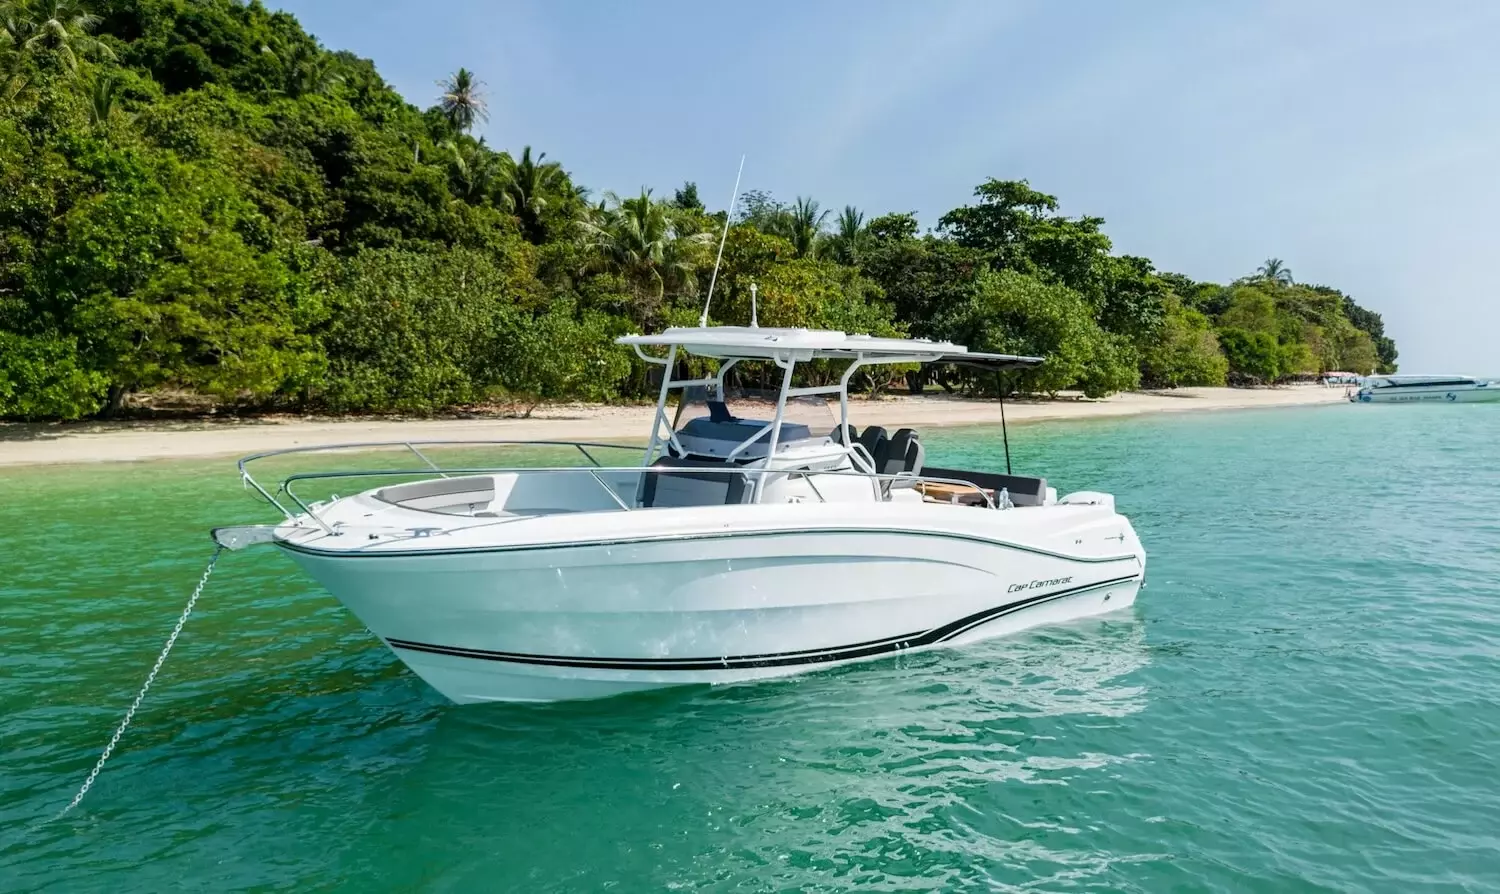 Na-O by Jeanneau - Top rates for a Charter of a private Power Boat in Thailand